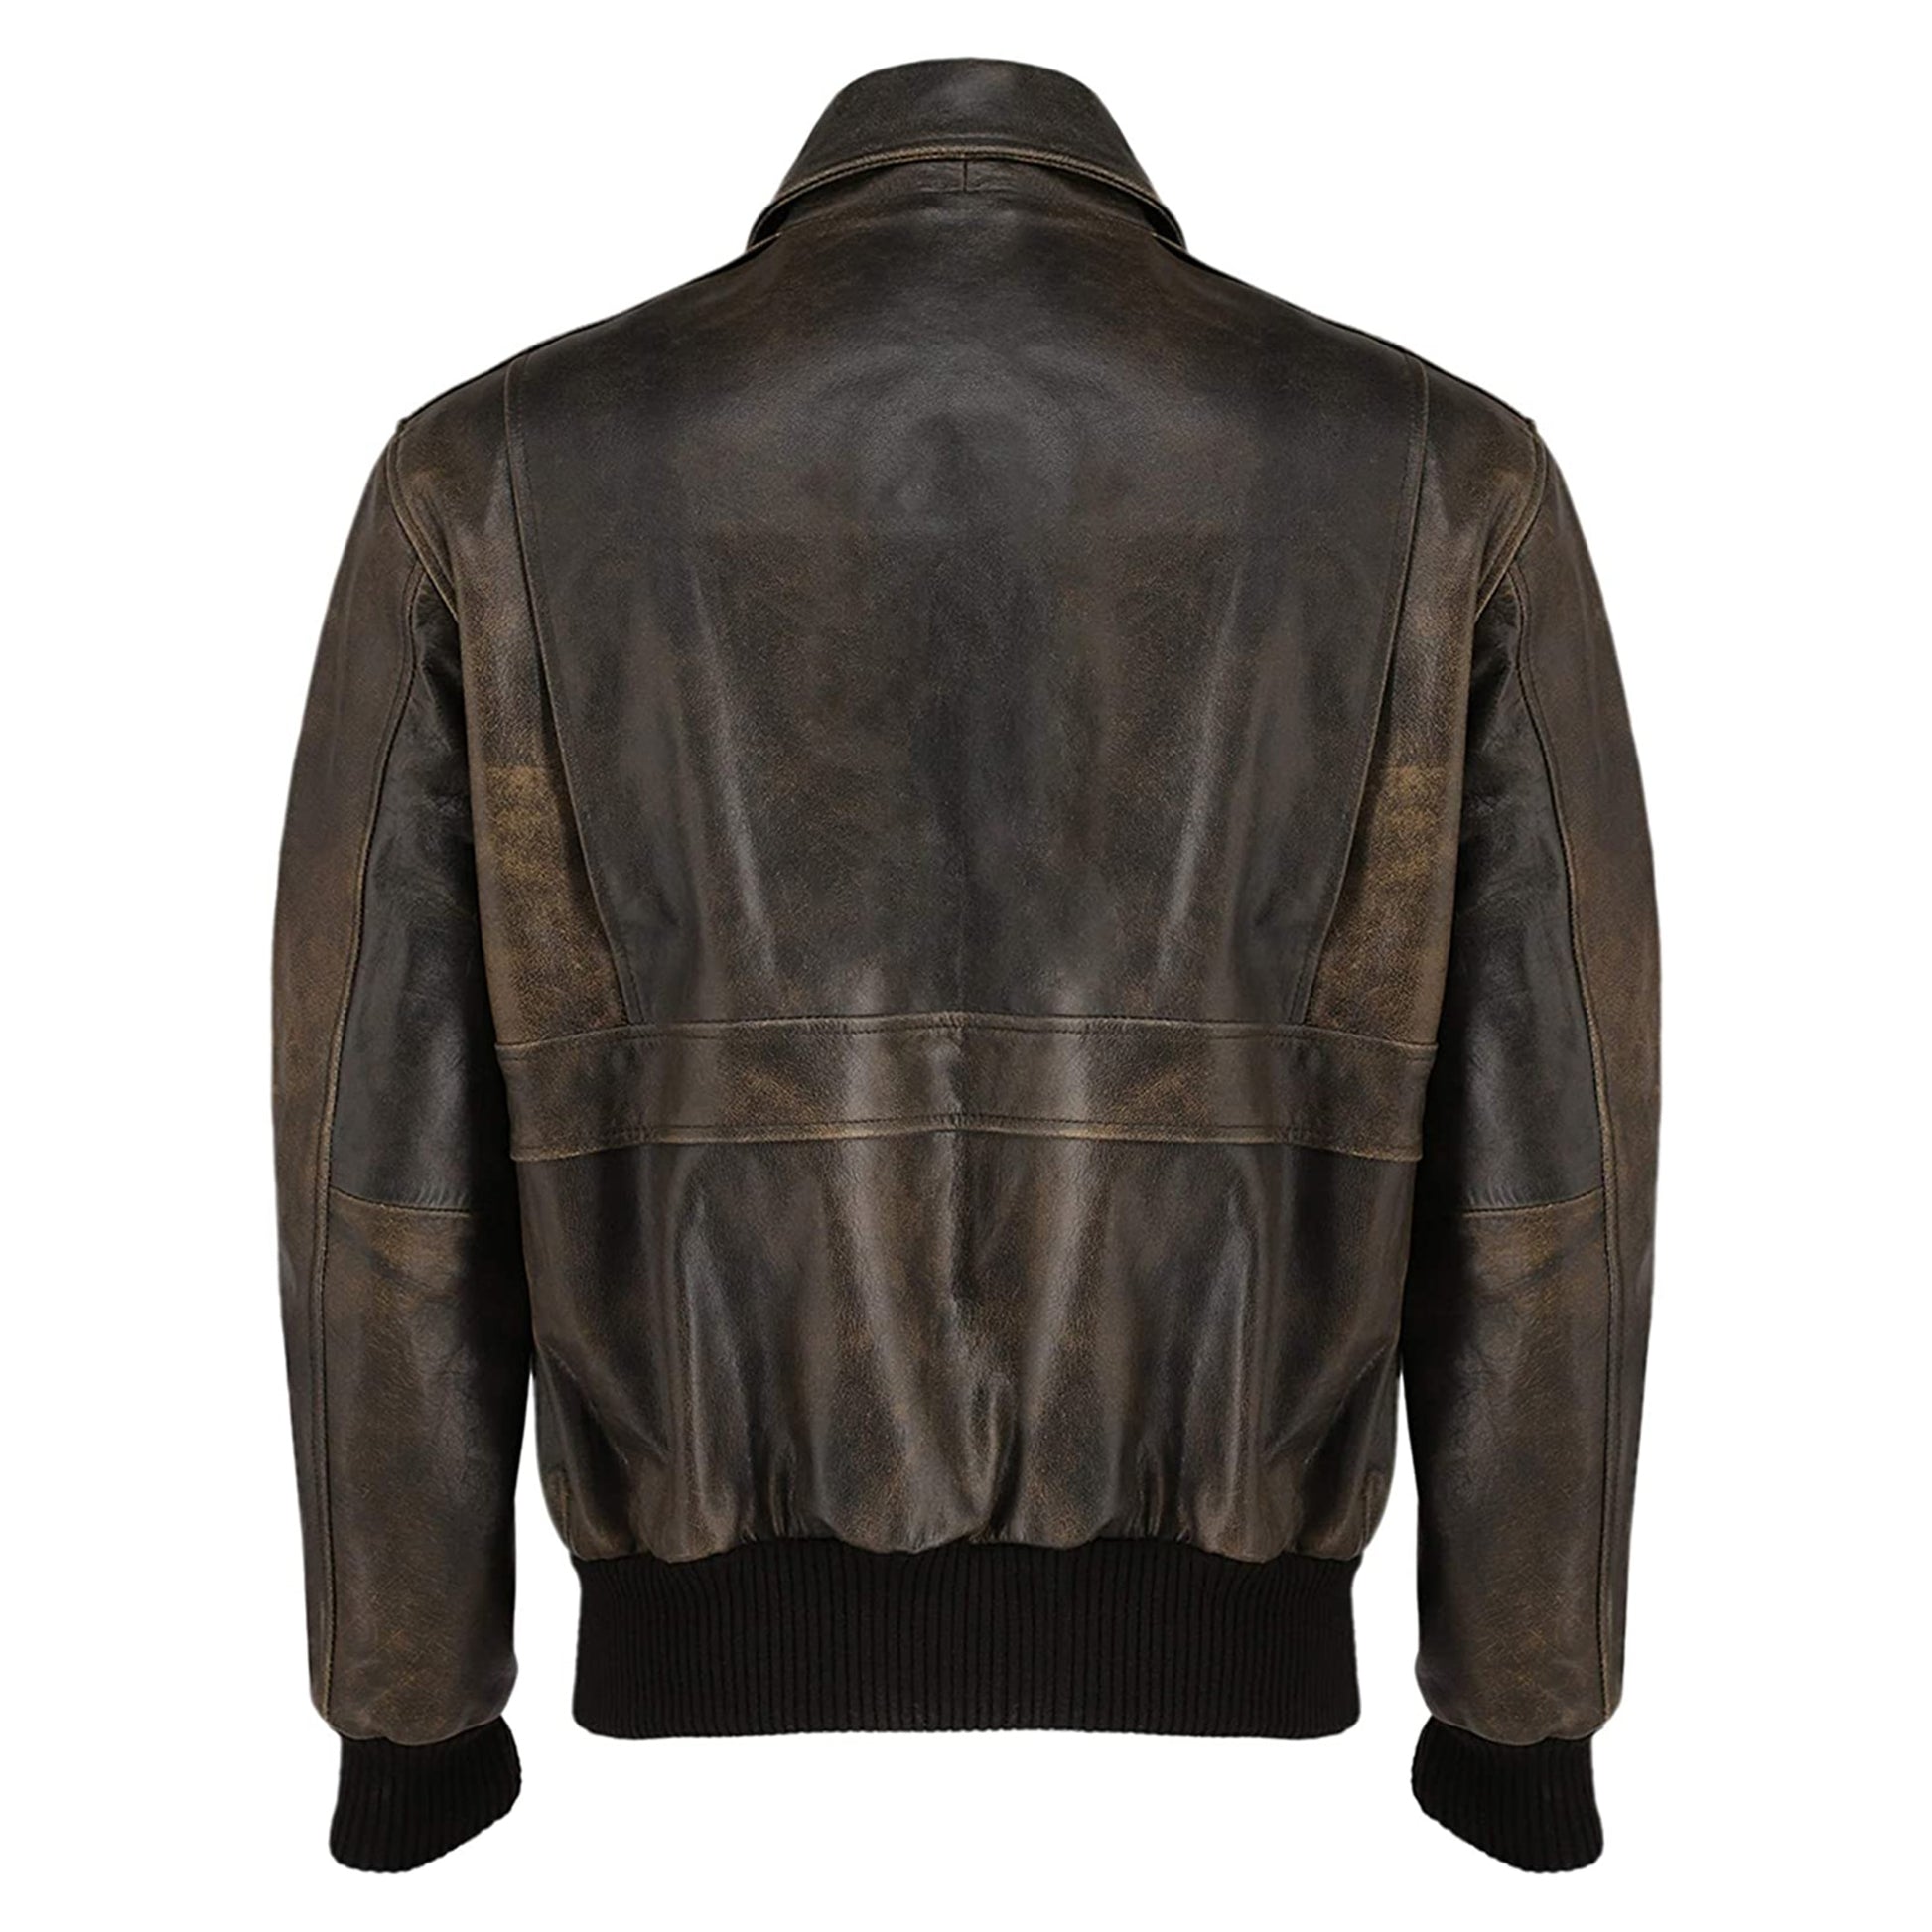 A2 Aviator Flight Jacket For Men Real Cowhide Distressed Leather Jacket